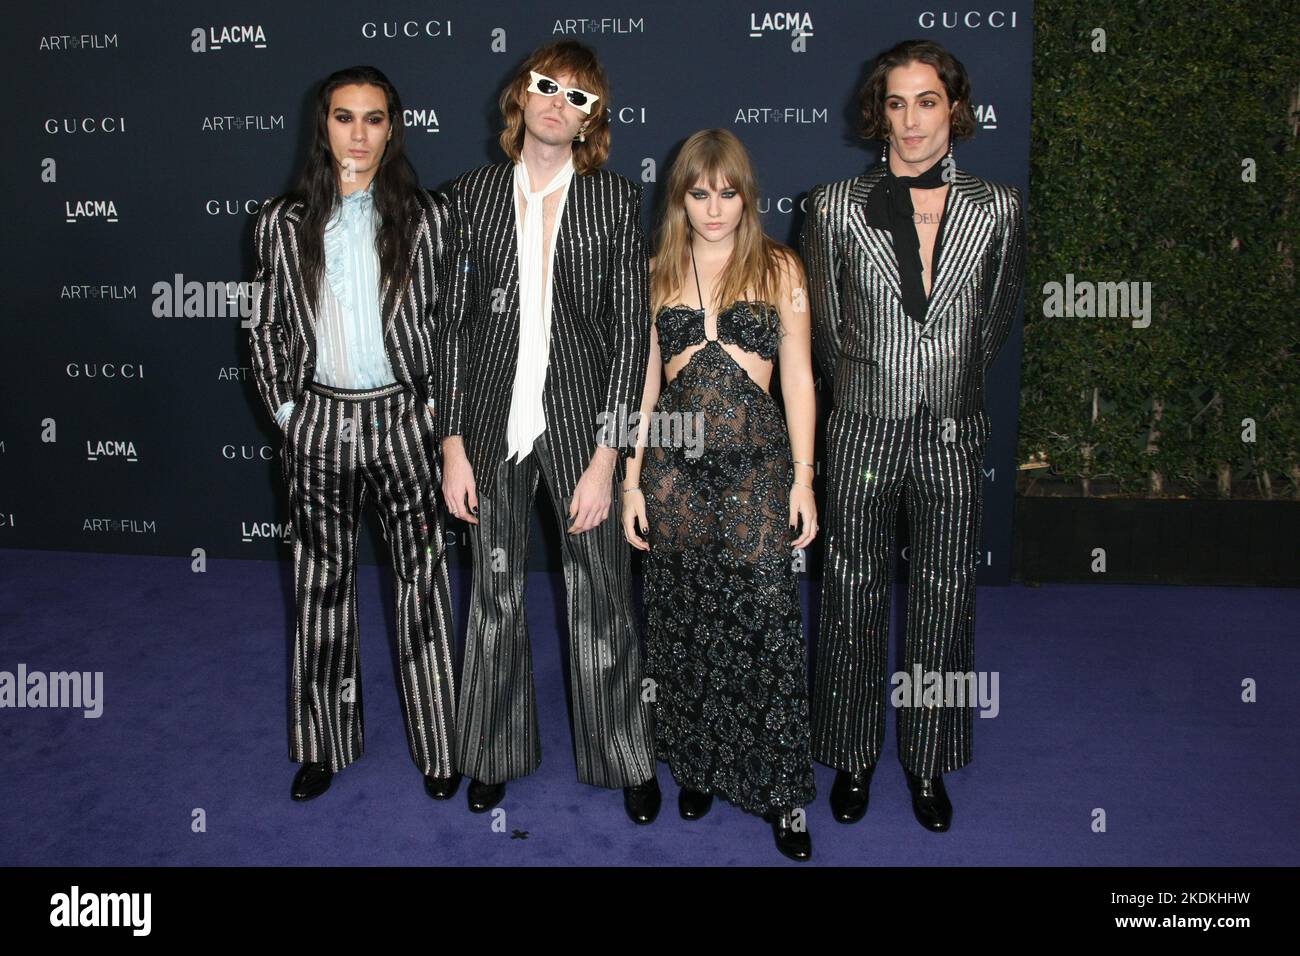 Ethan Torchio, Thomas Raggi, Victoria De Angelis, and Damiano David of Maneskin attend the 2022 LACMA ART+FILM GALA Presented By Gucci at Los Angeles County Museum of Art on November 05, 2022 in Los Angeles, California. Photo: CraSH/imageSPACE/MediaPunch Stock Photo